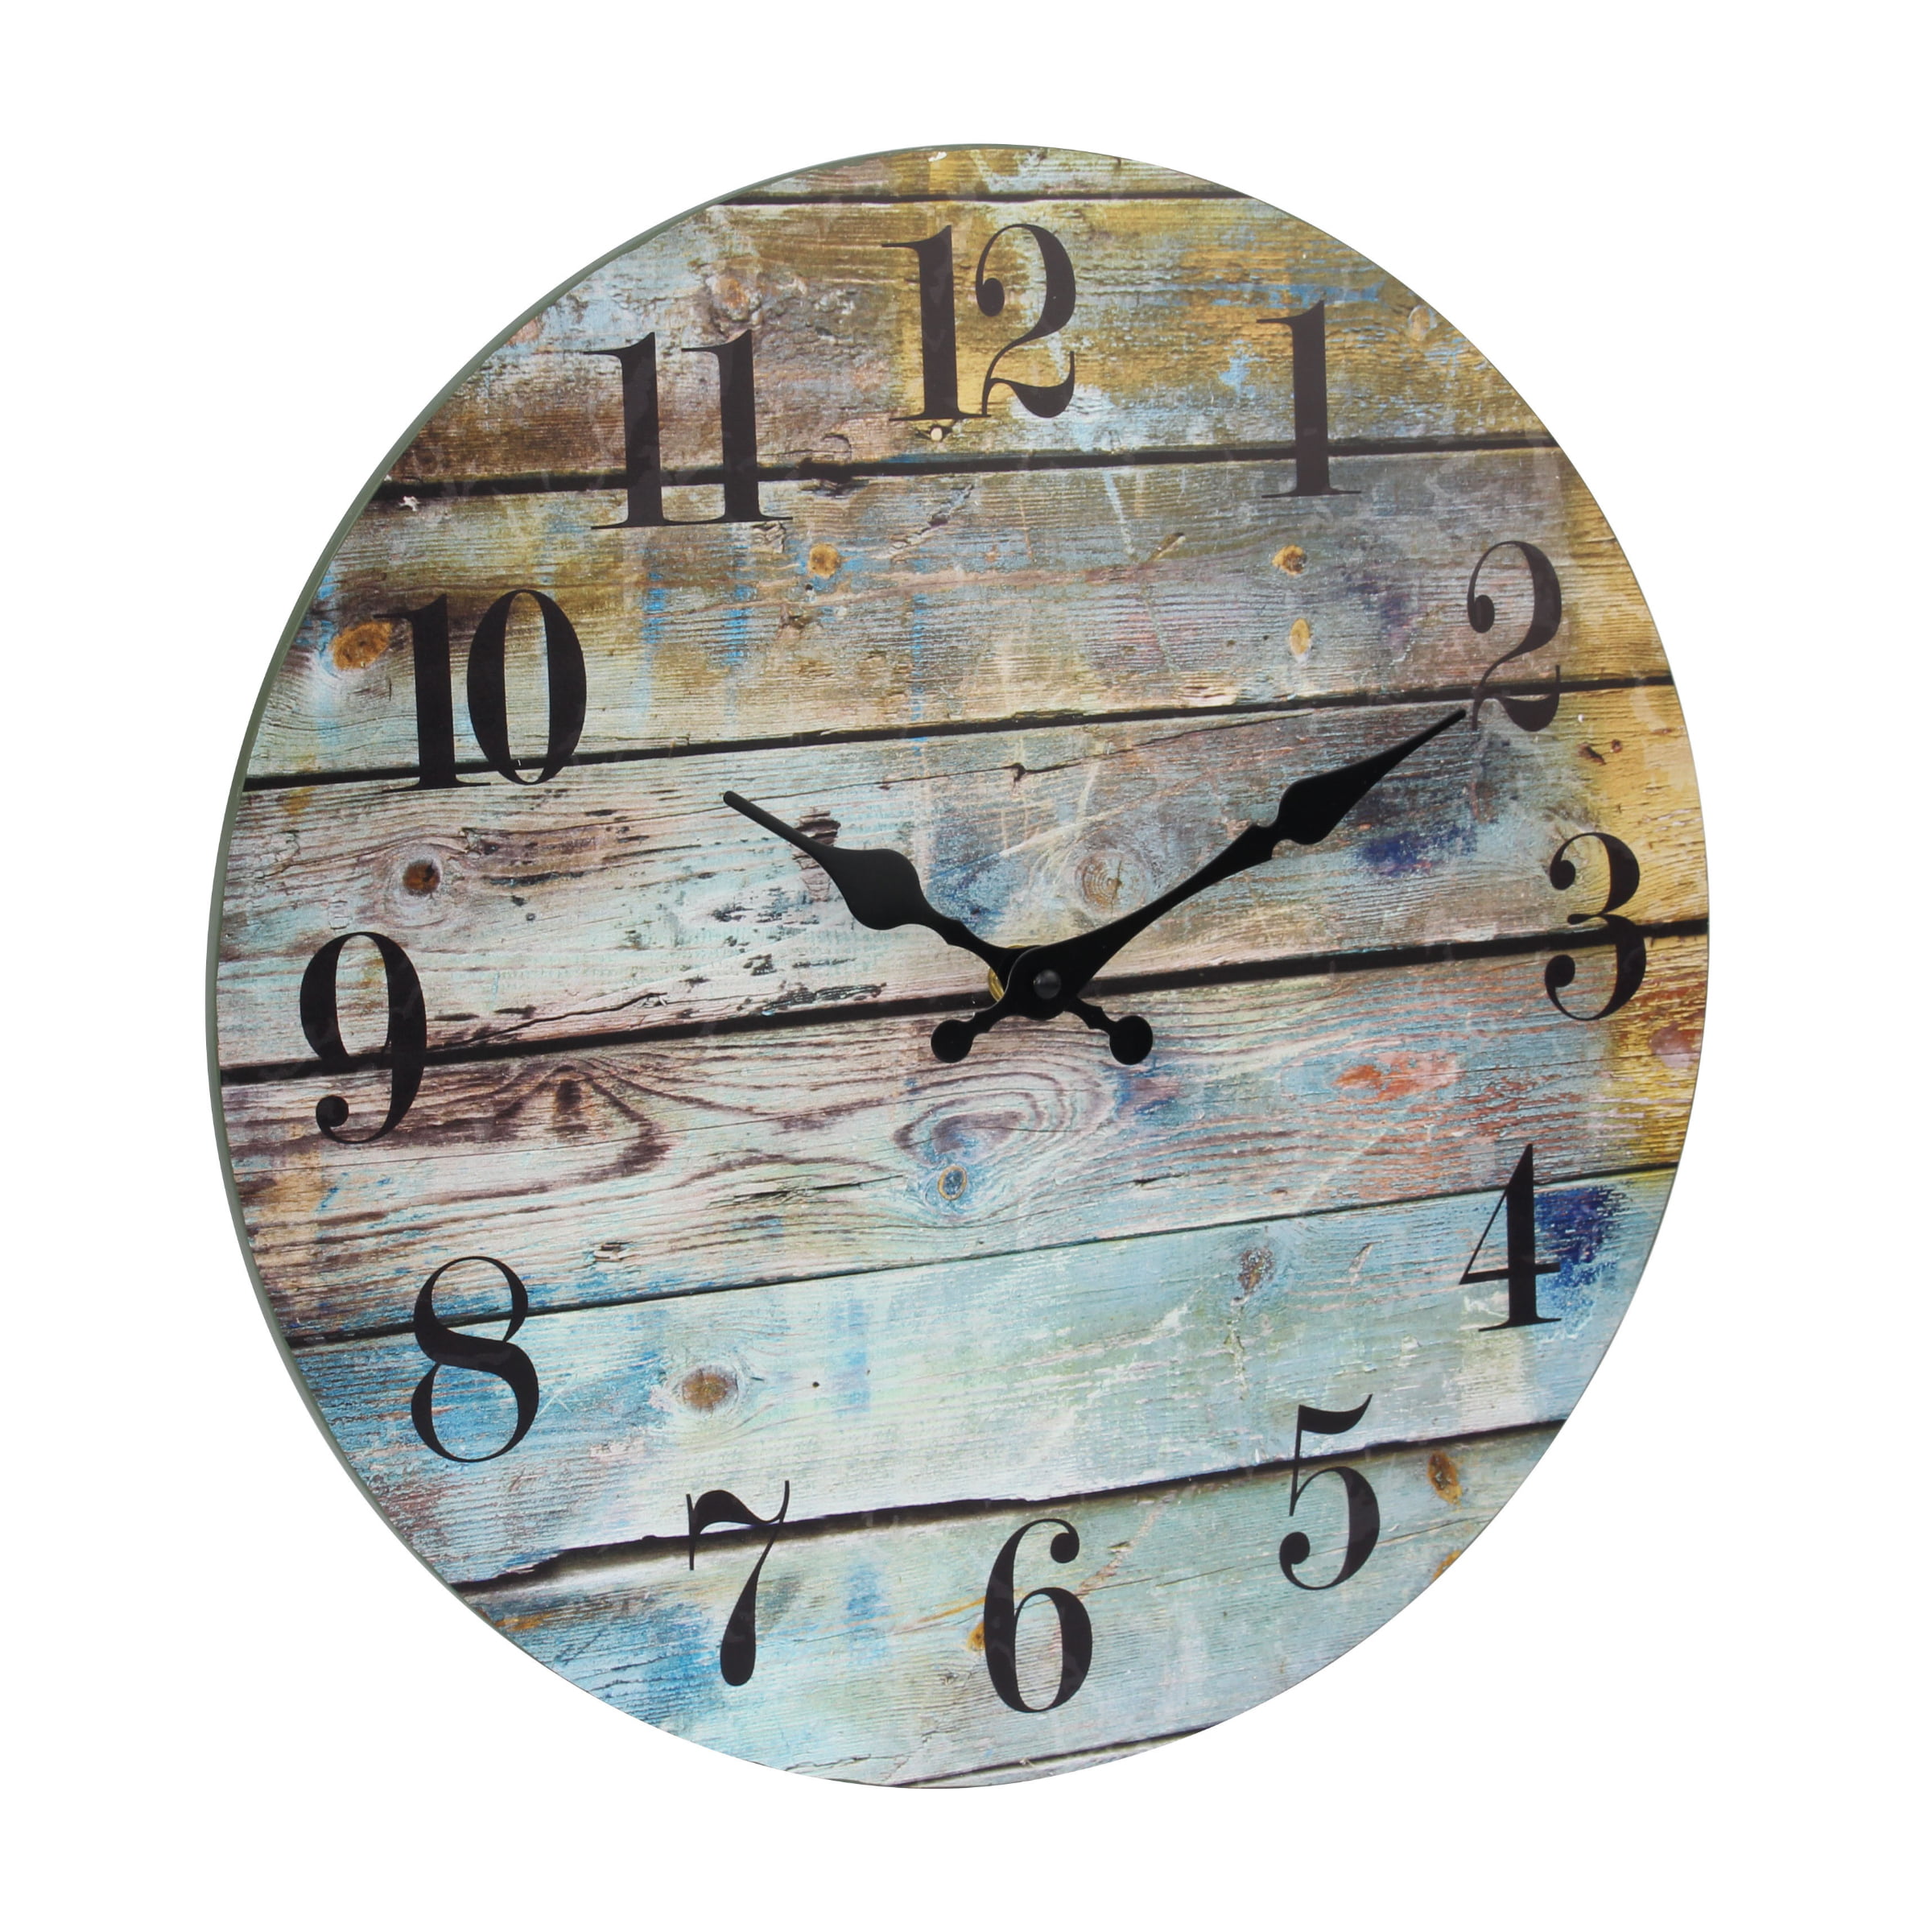 Details about   Wall Clock Round Battery Operated Rustic Iron Decor Vintage Farmhouse 23 Inch 